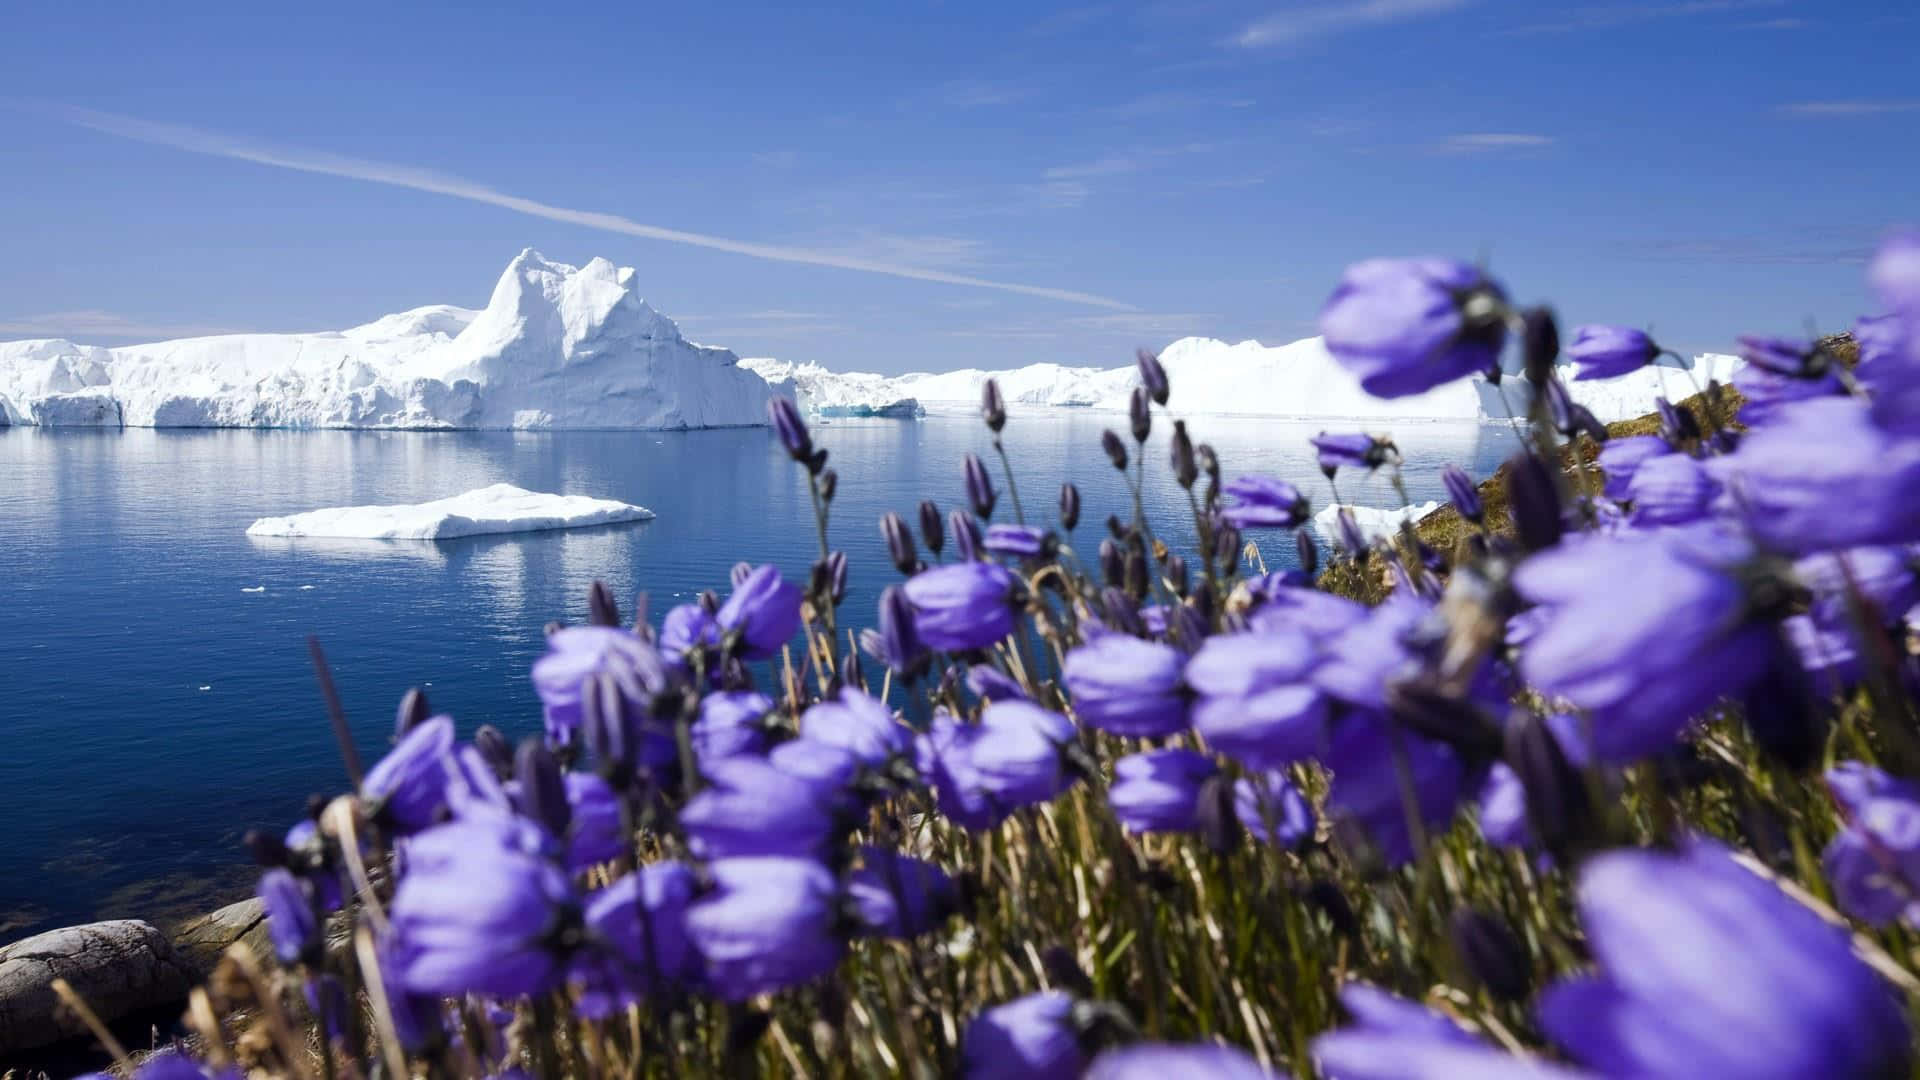 A breathtaking view of the Illulissat Icefjord in Greenland